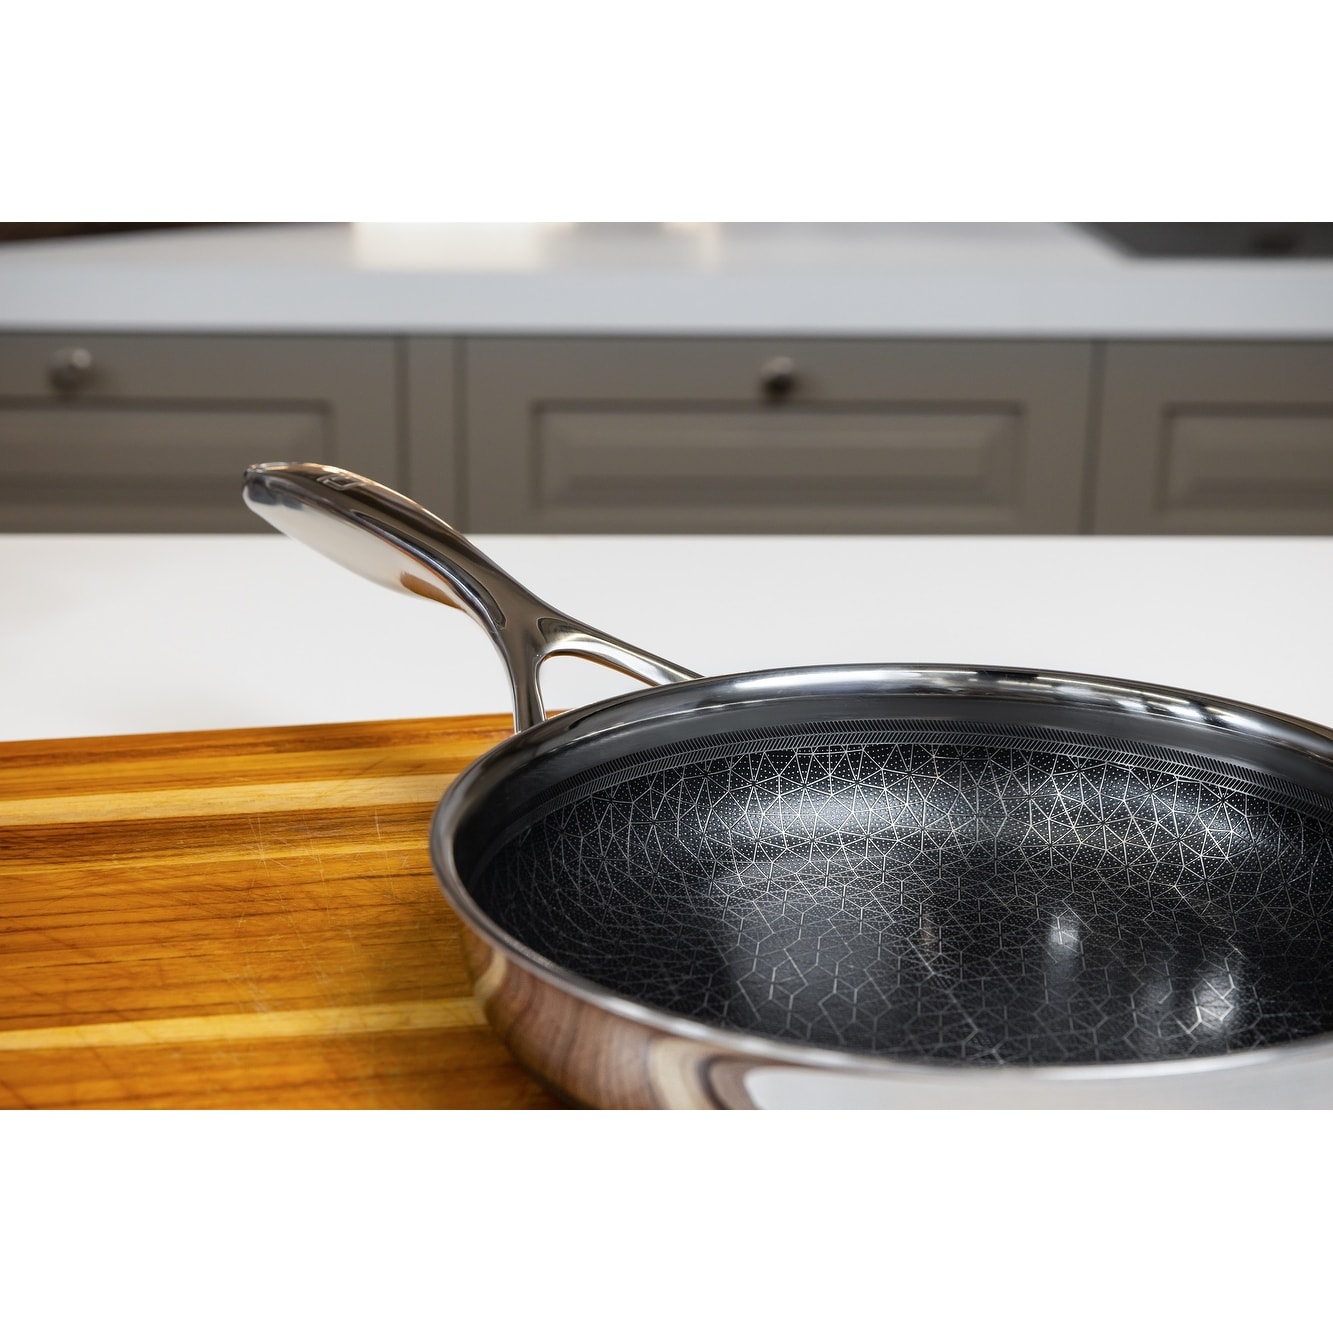 https://ak1.ostkcdn.com/images/products/is/images/direct/5badd3197d4f9b98b0c08a421566e9102cfd0f8e/DiamondClad-by-Livwell-Hybrid-Nonstick-Frying-Pan.jpg